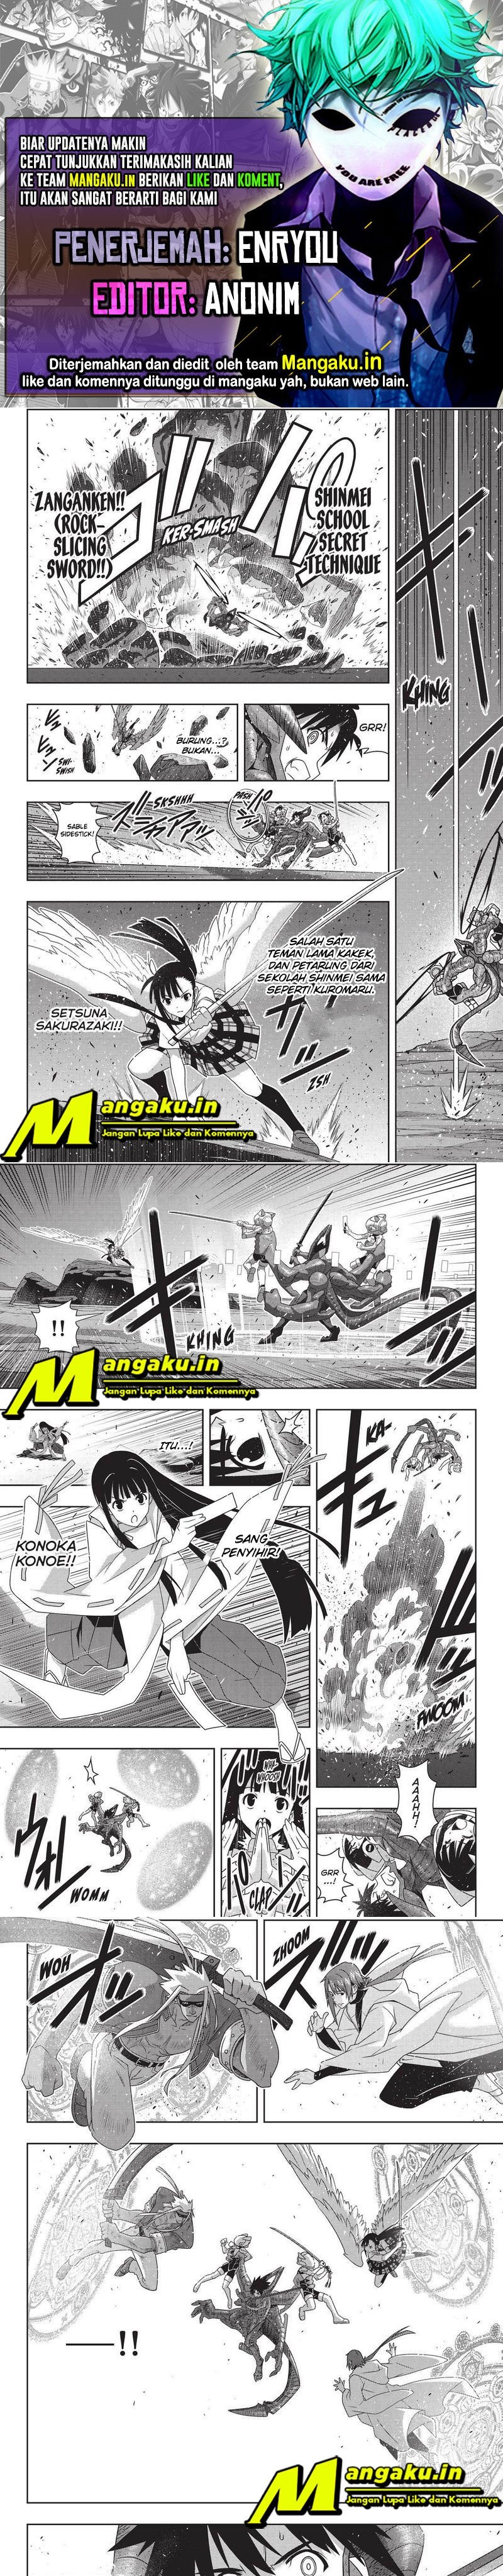 UQ Holder!: Chapter 190.2 - Page 1